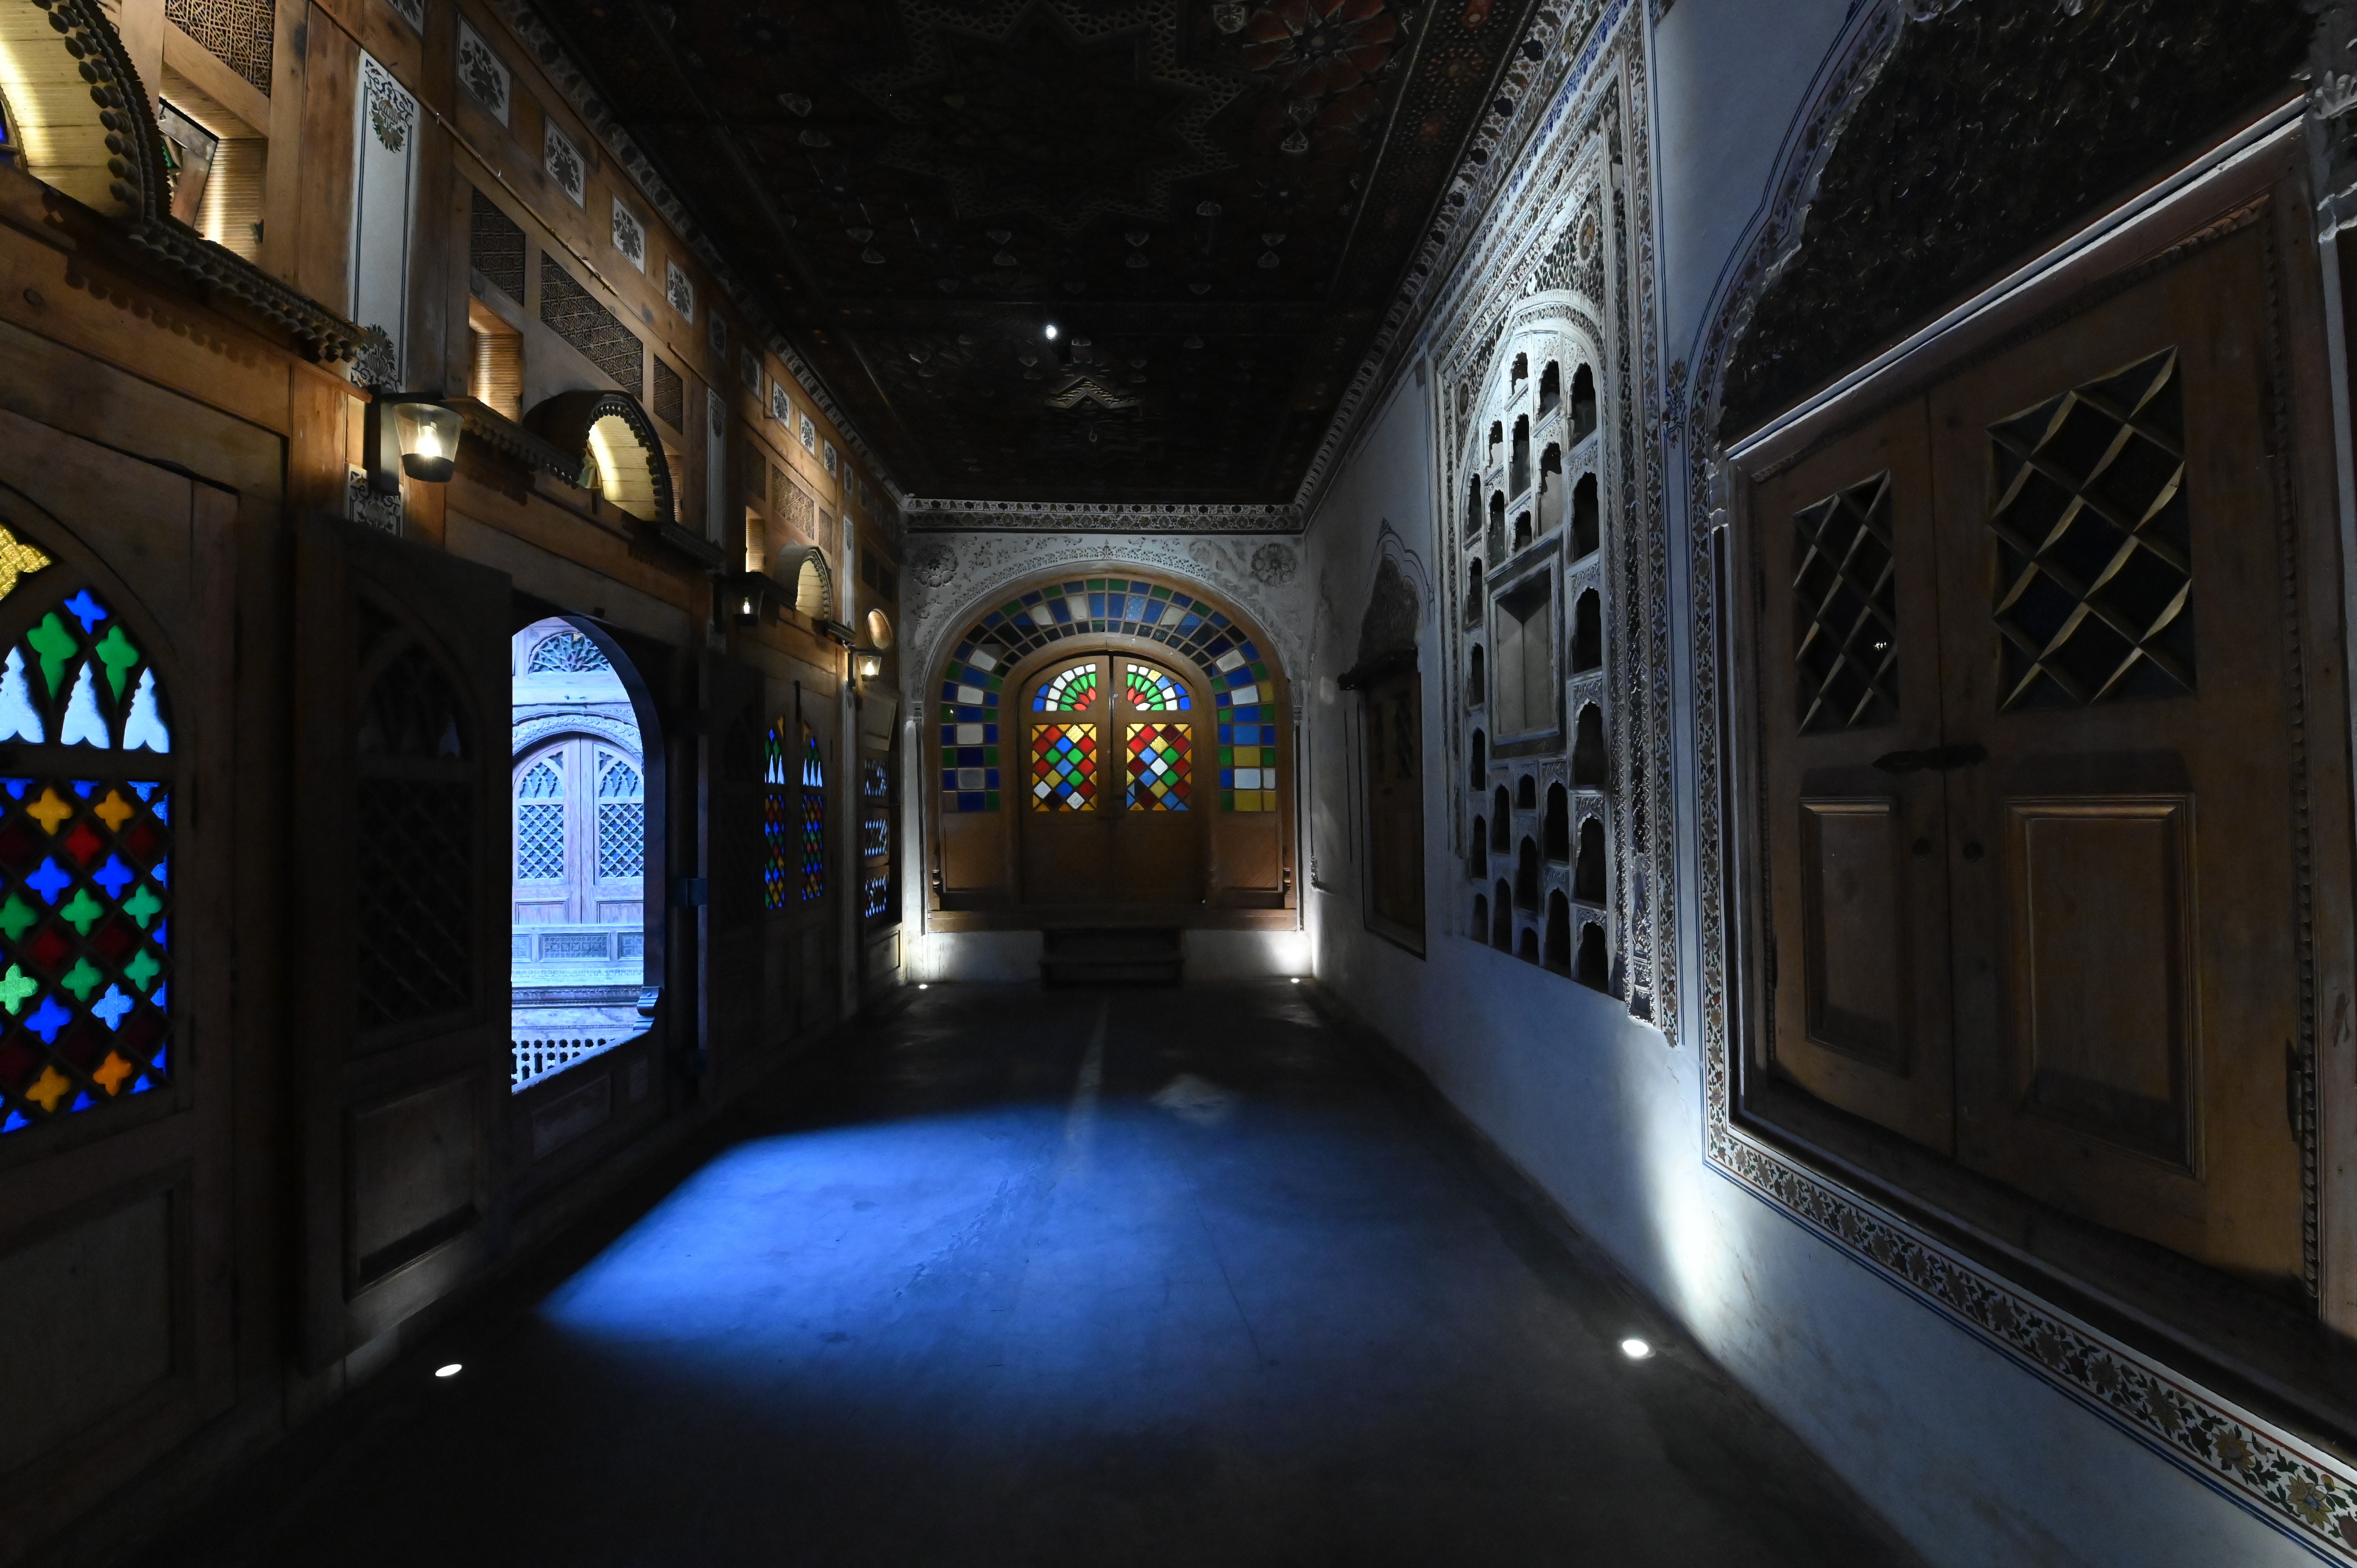 The magnificent interior view of Sethi House that is a historical building of the British era and had a unique architectural value